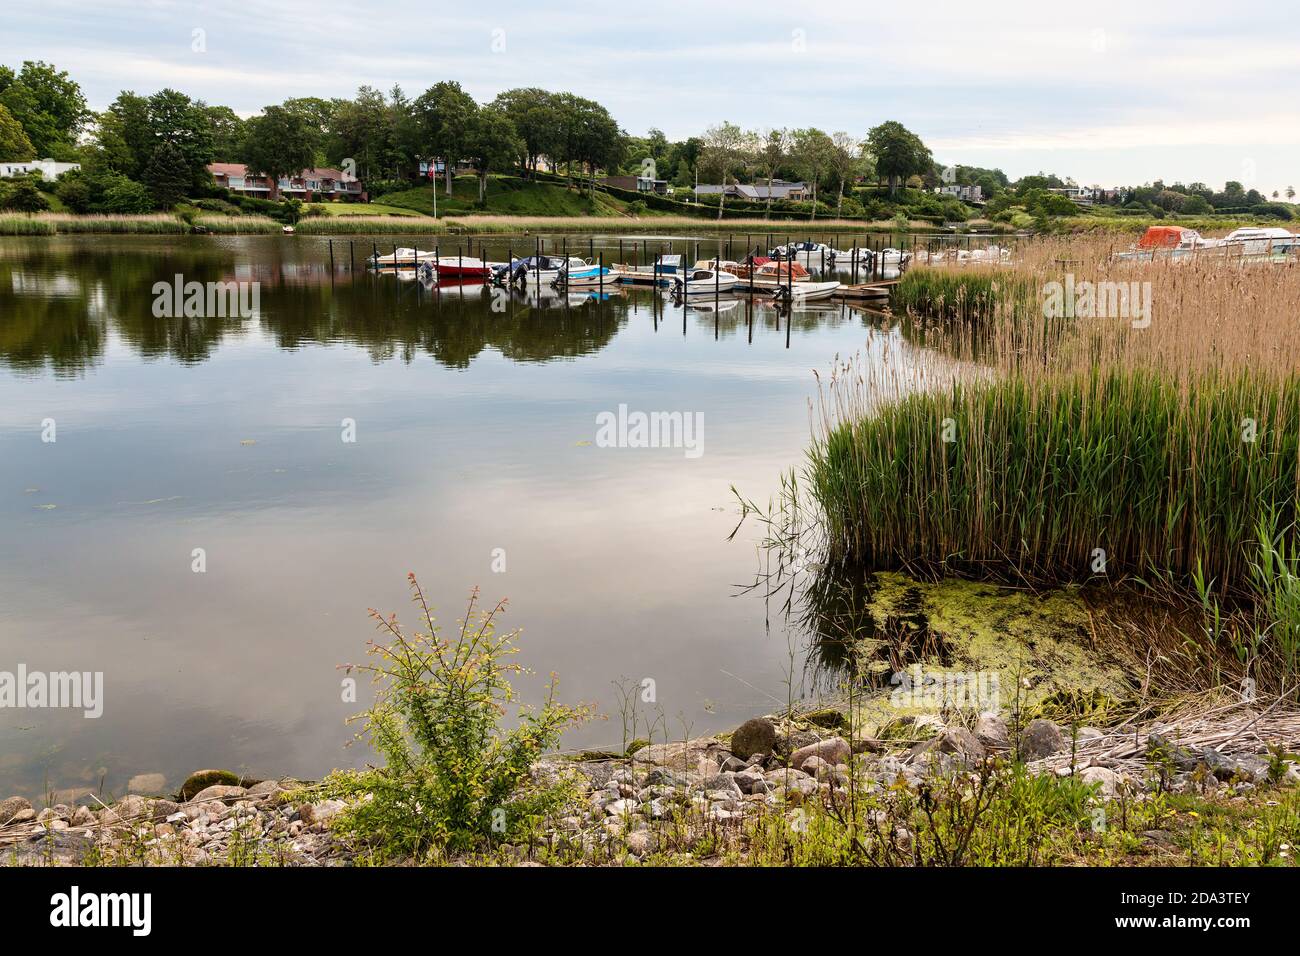 Small boats in an inlet at Horsens, Denmark Stock Photo